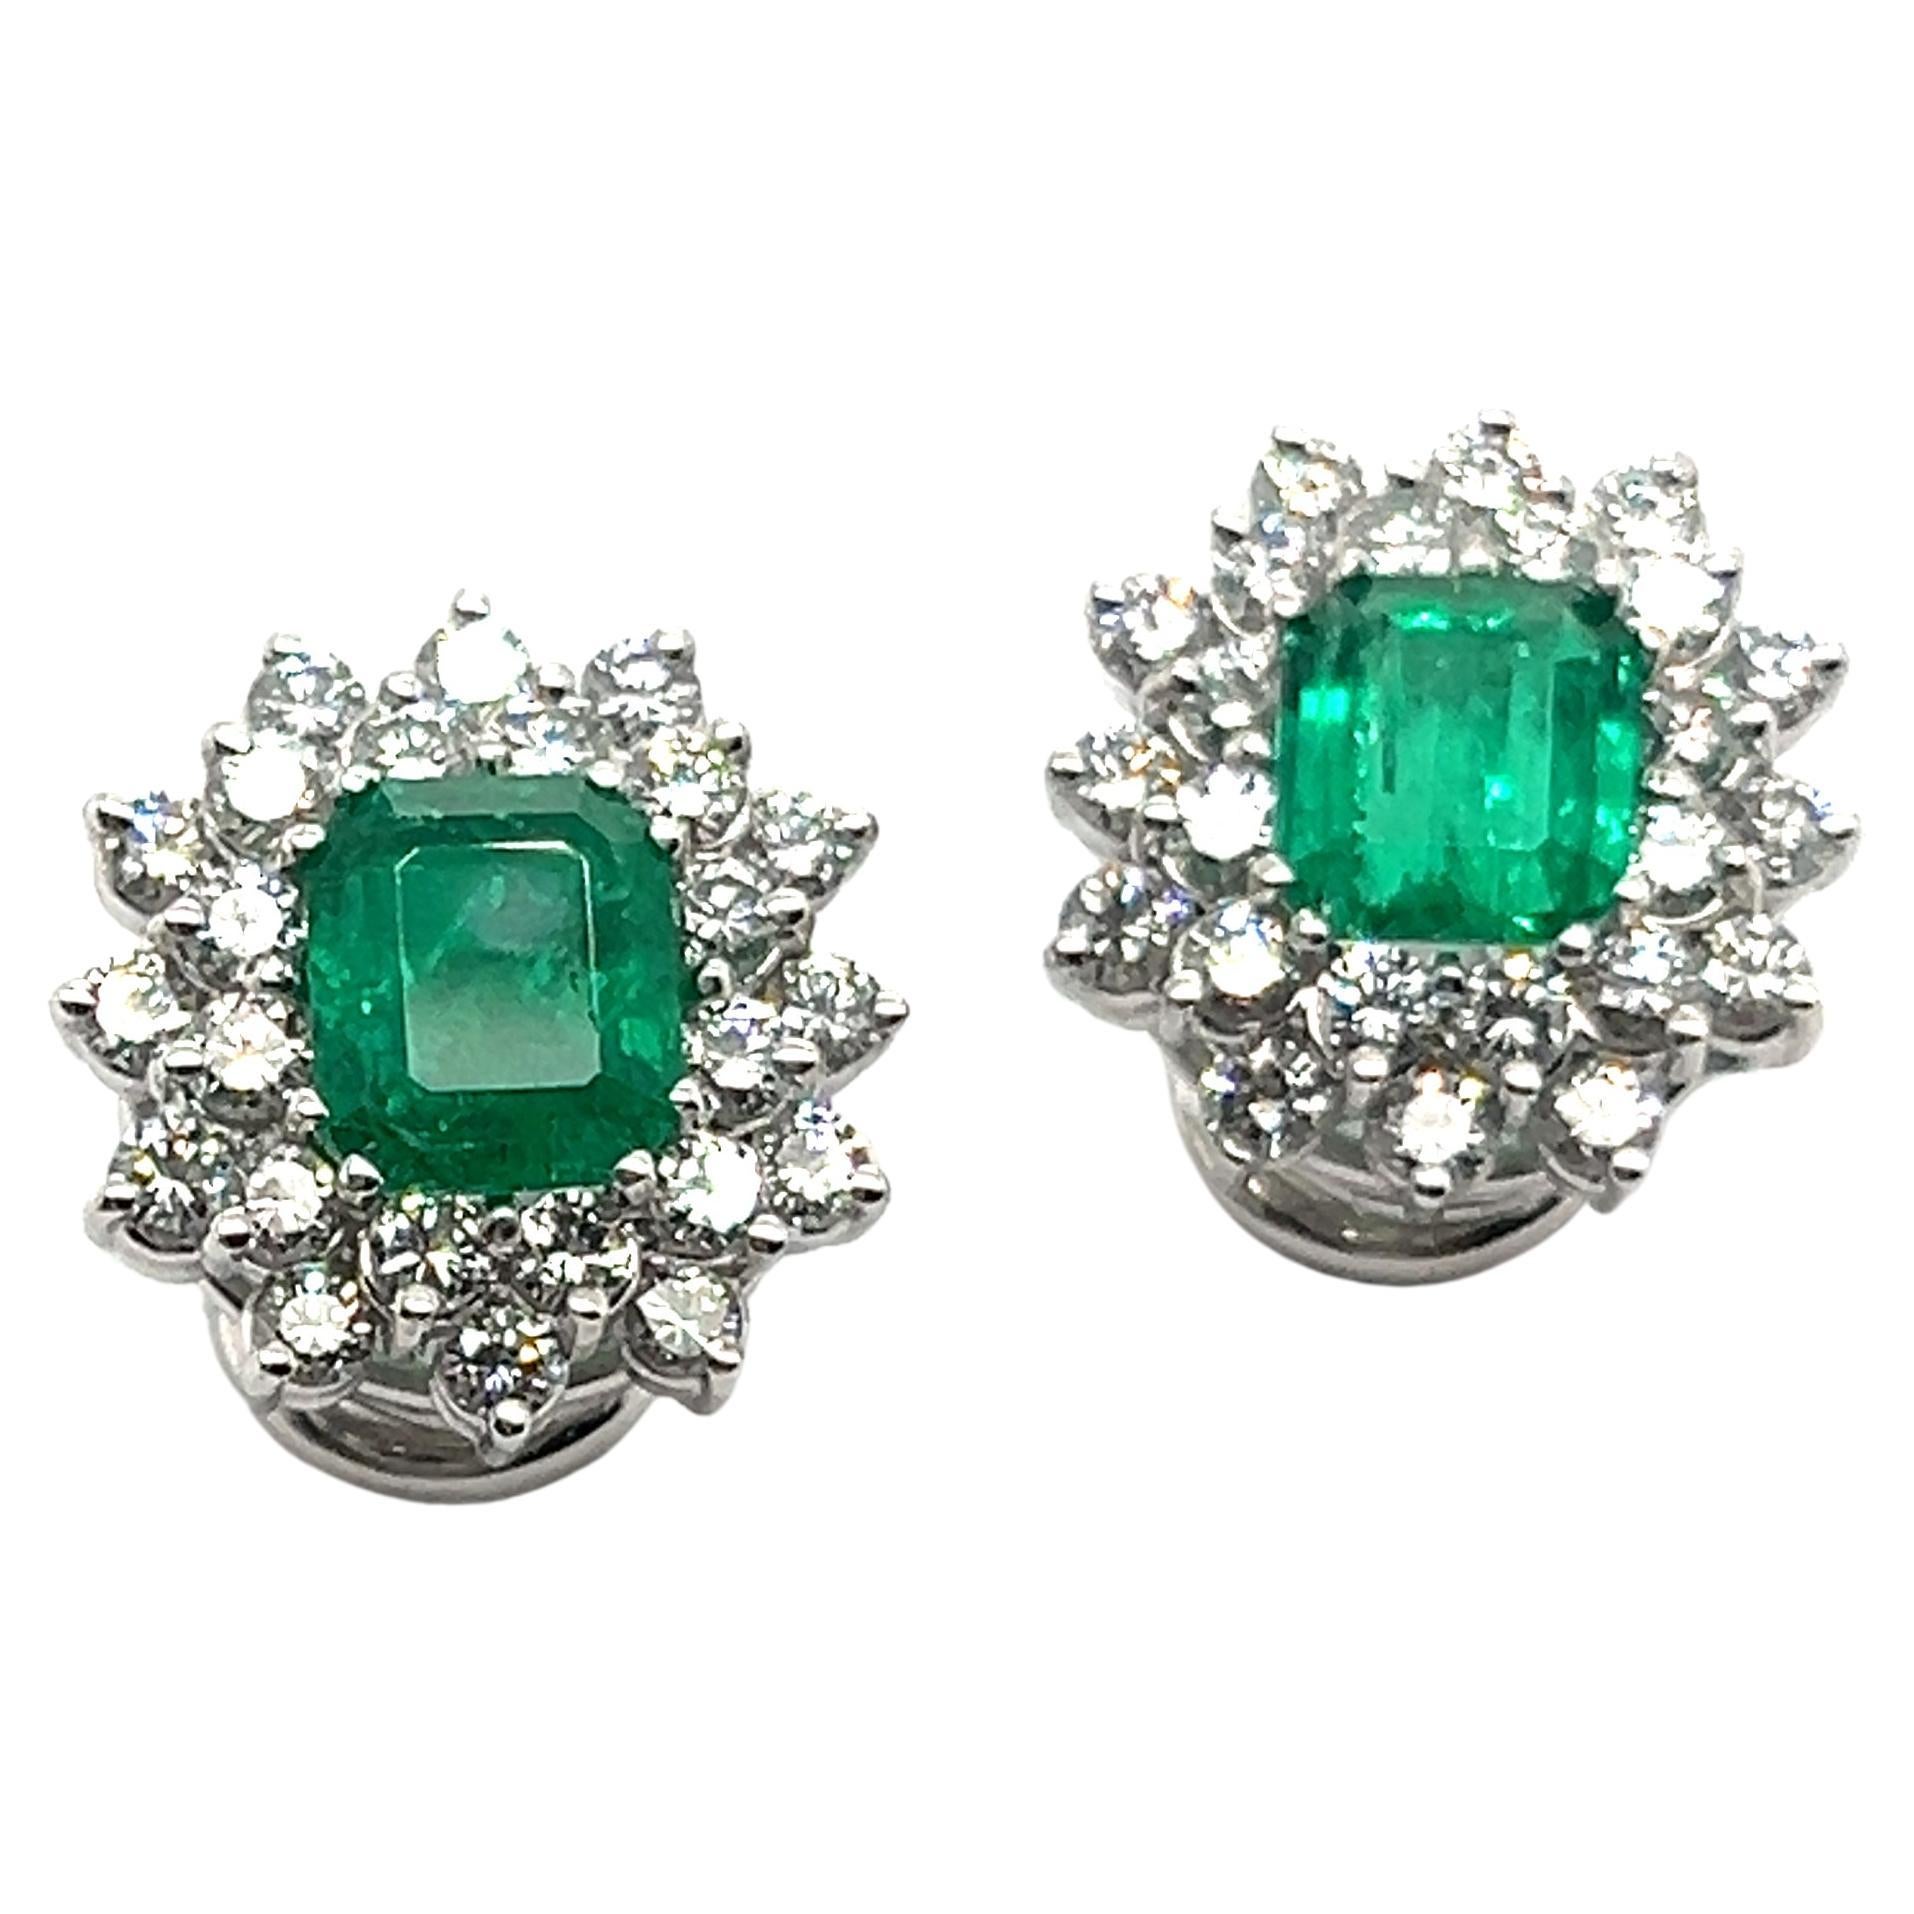 Earrings with Emeralds and Diamonds in 18 Karat White Gold